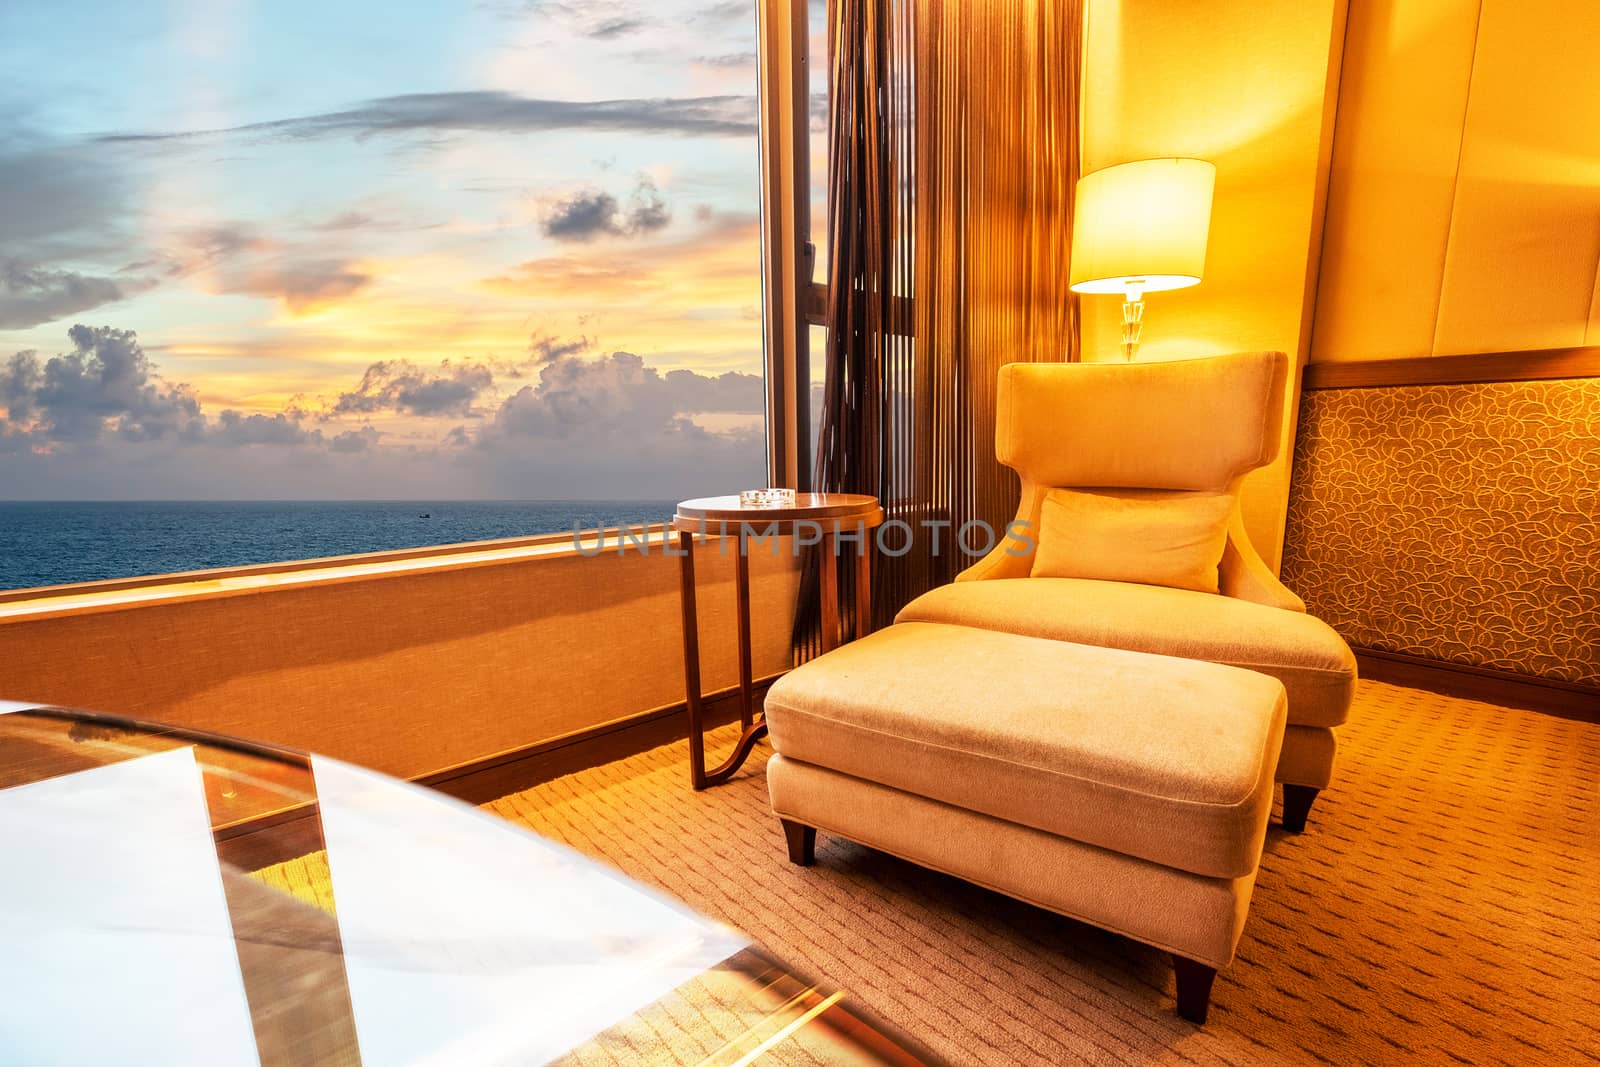 Sofa in living room in sunset at sea background  by Surasak